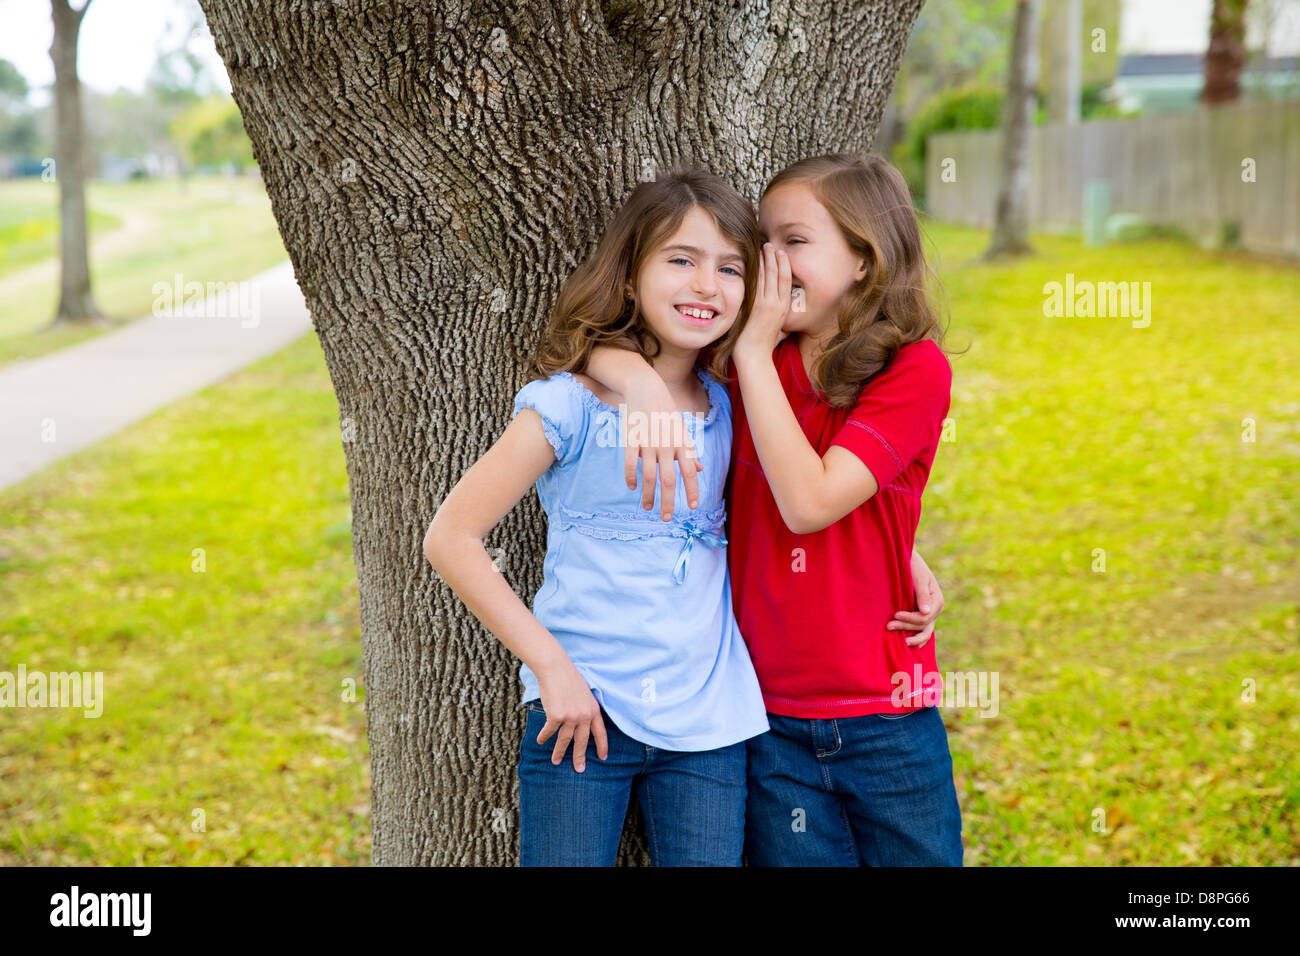 children kid friend girls whispering ear playing smiling in a park tree outdoor Stock Photo